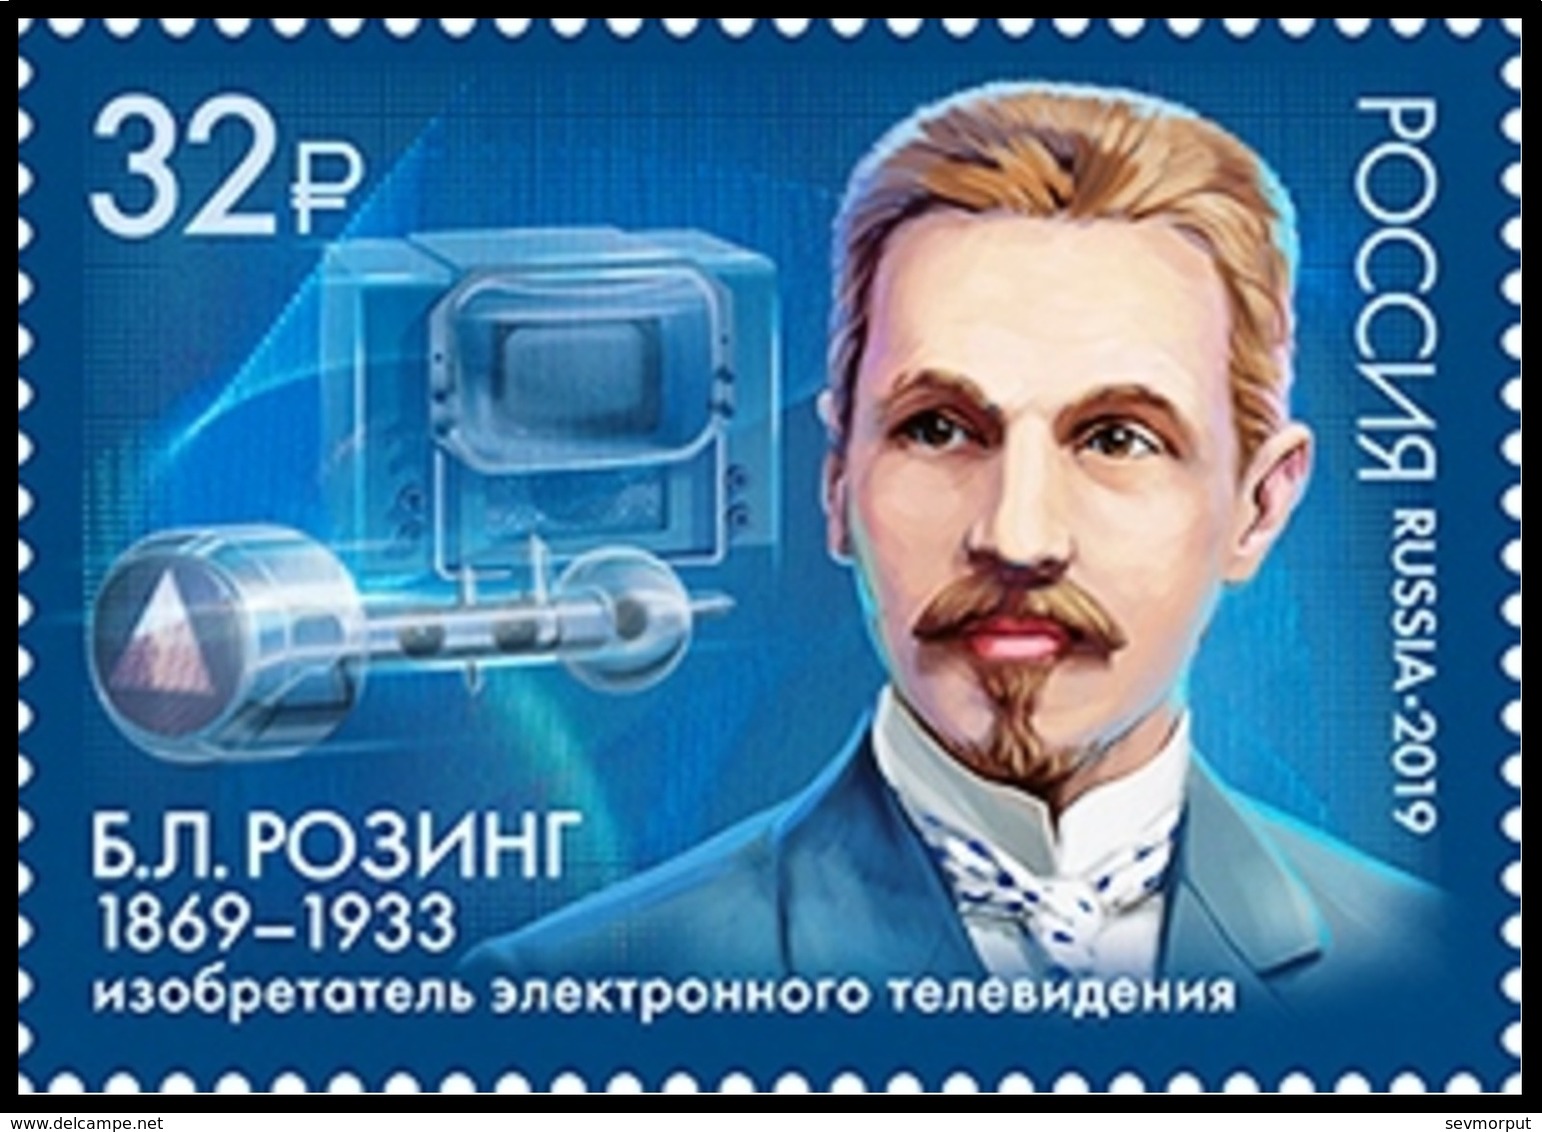 RUSSIA 2019 Stamp MNH VF ** Mi 2688 ROZING Rosing TELEVISION INVENTOR ENGINEER PHYSICS PHYSIQUE Telecom SCIENCE 2471 - Neufs